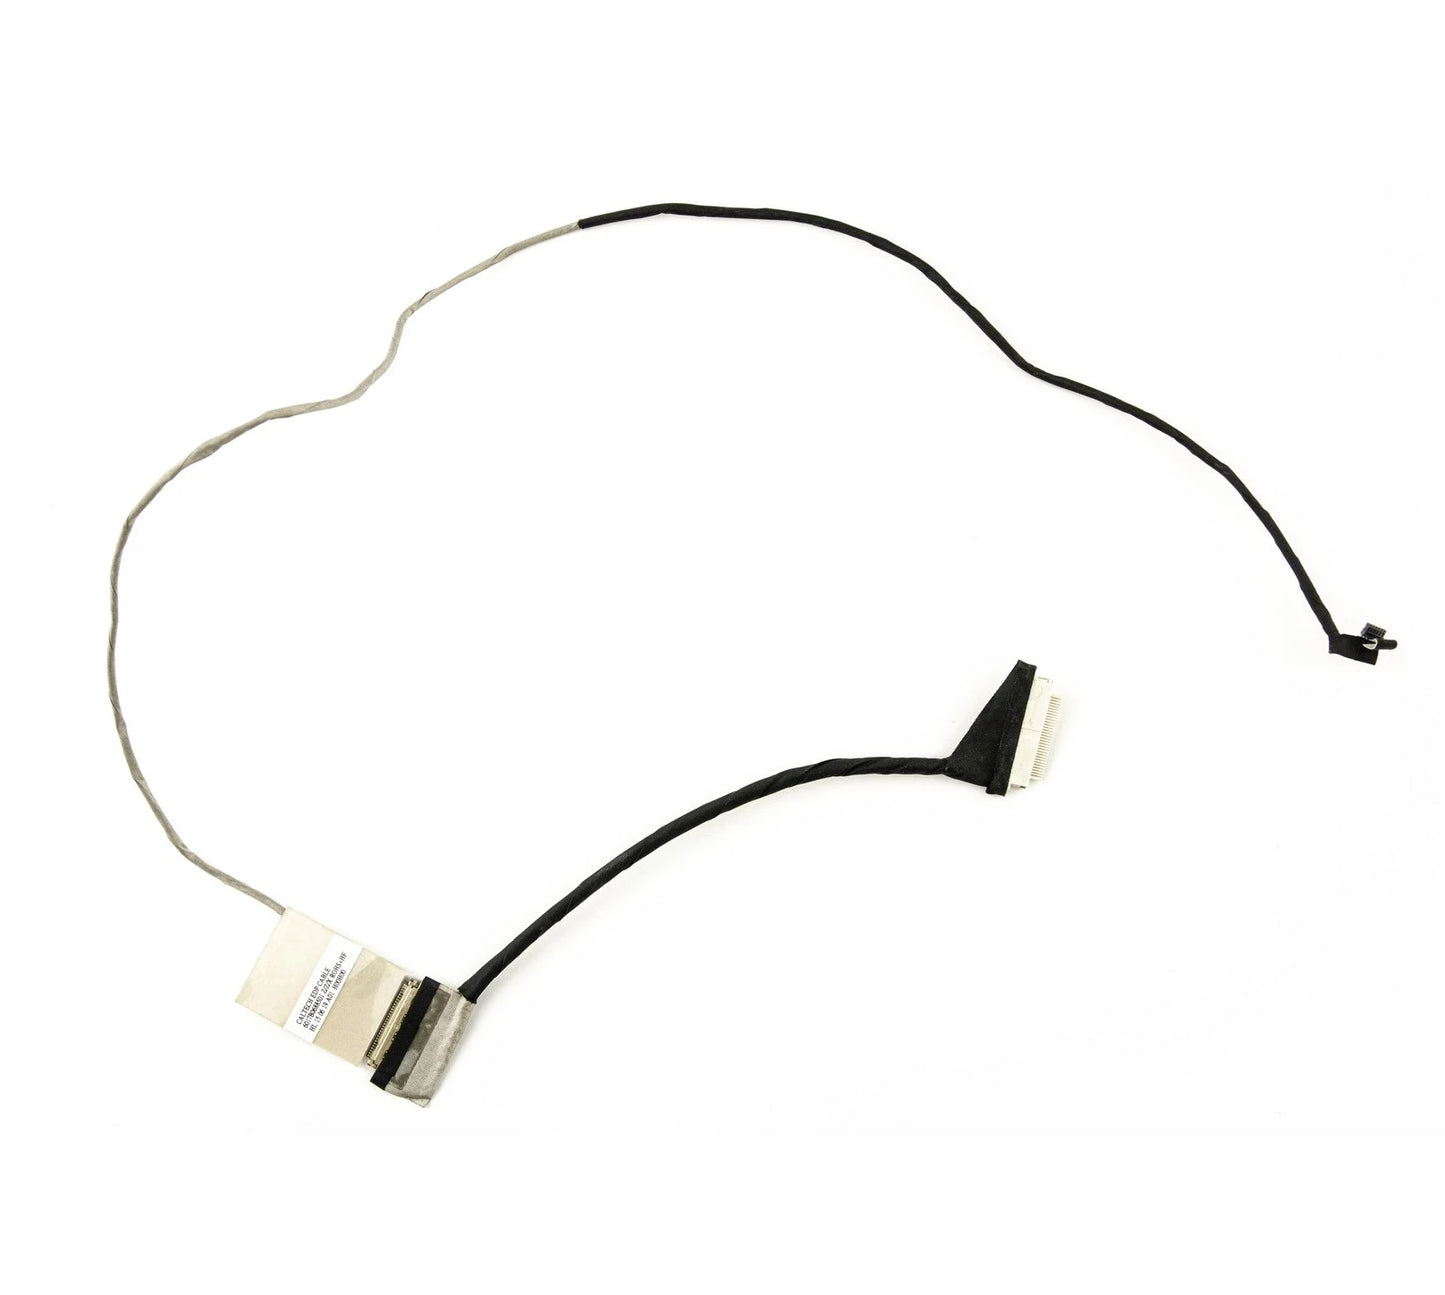 Acer New LCD LED Display Video Screen Cable Aspire One Cloudbook AO1-131M 6017B0688501 50.SHFN4.005